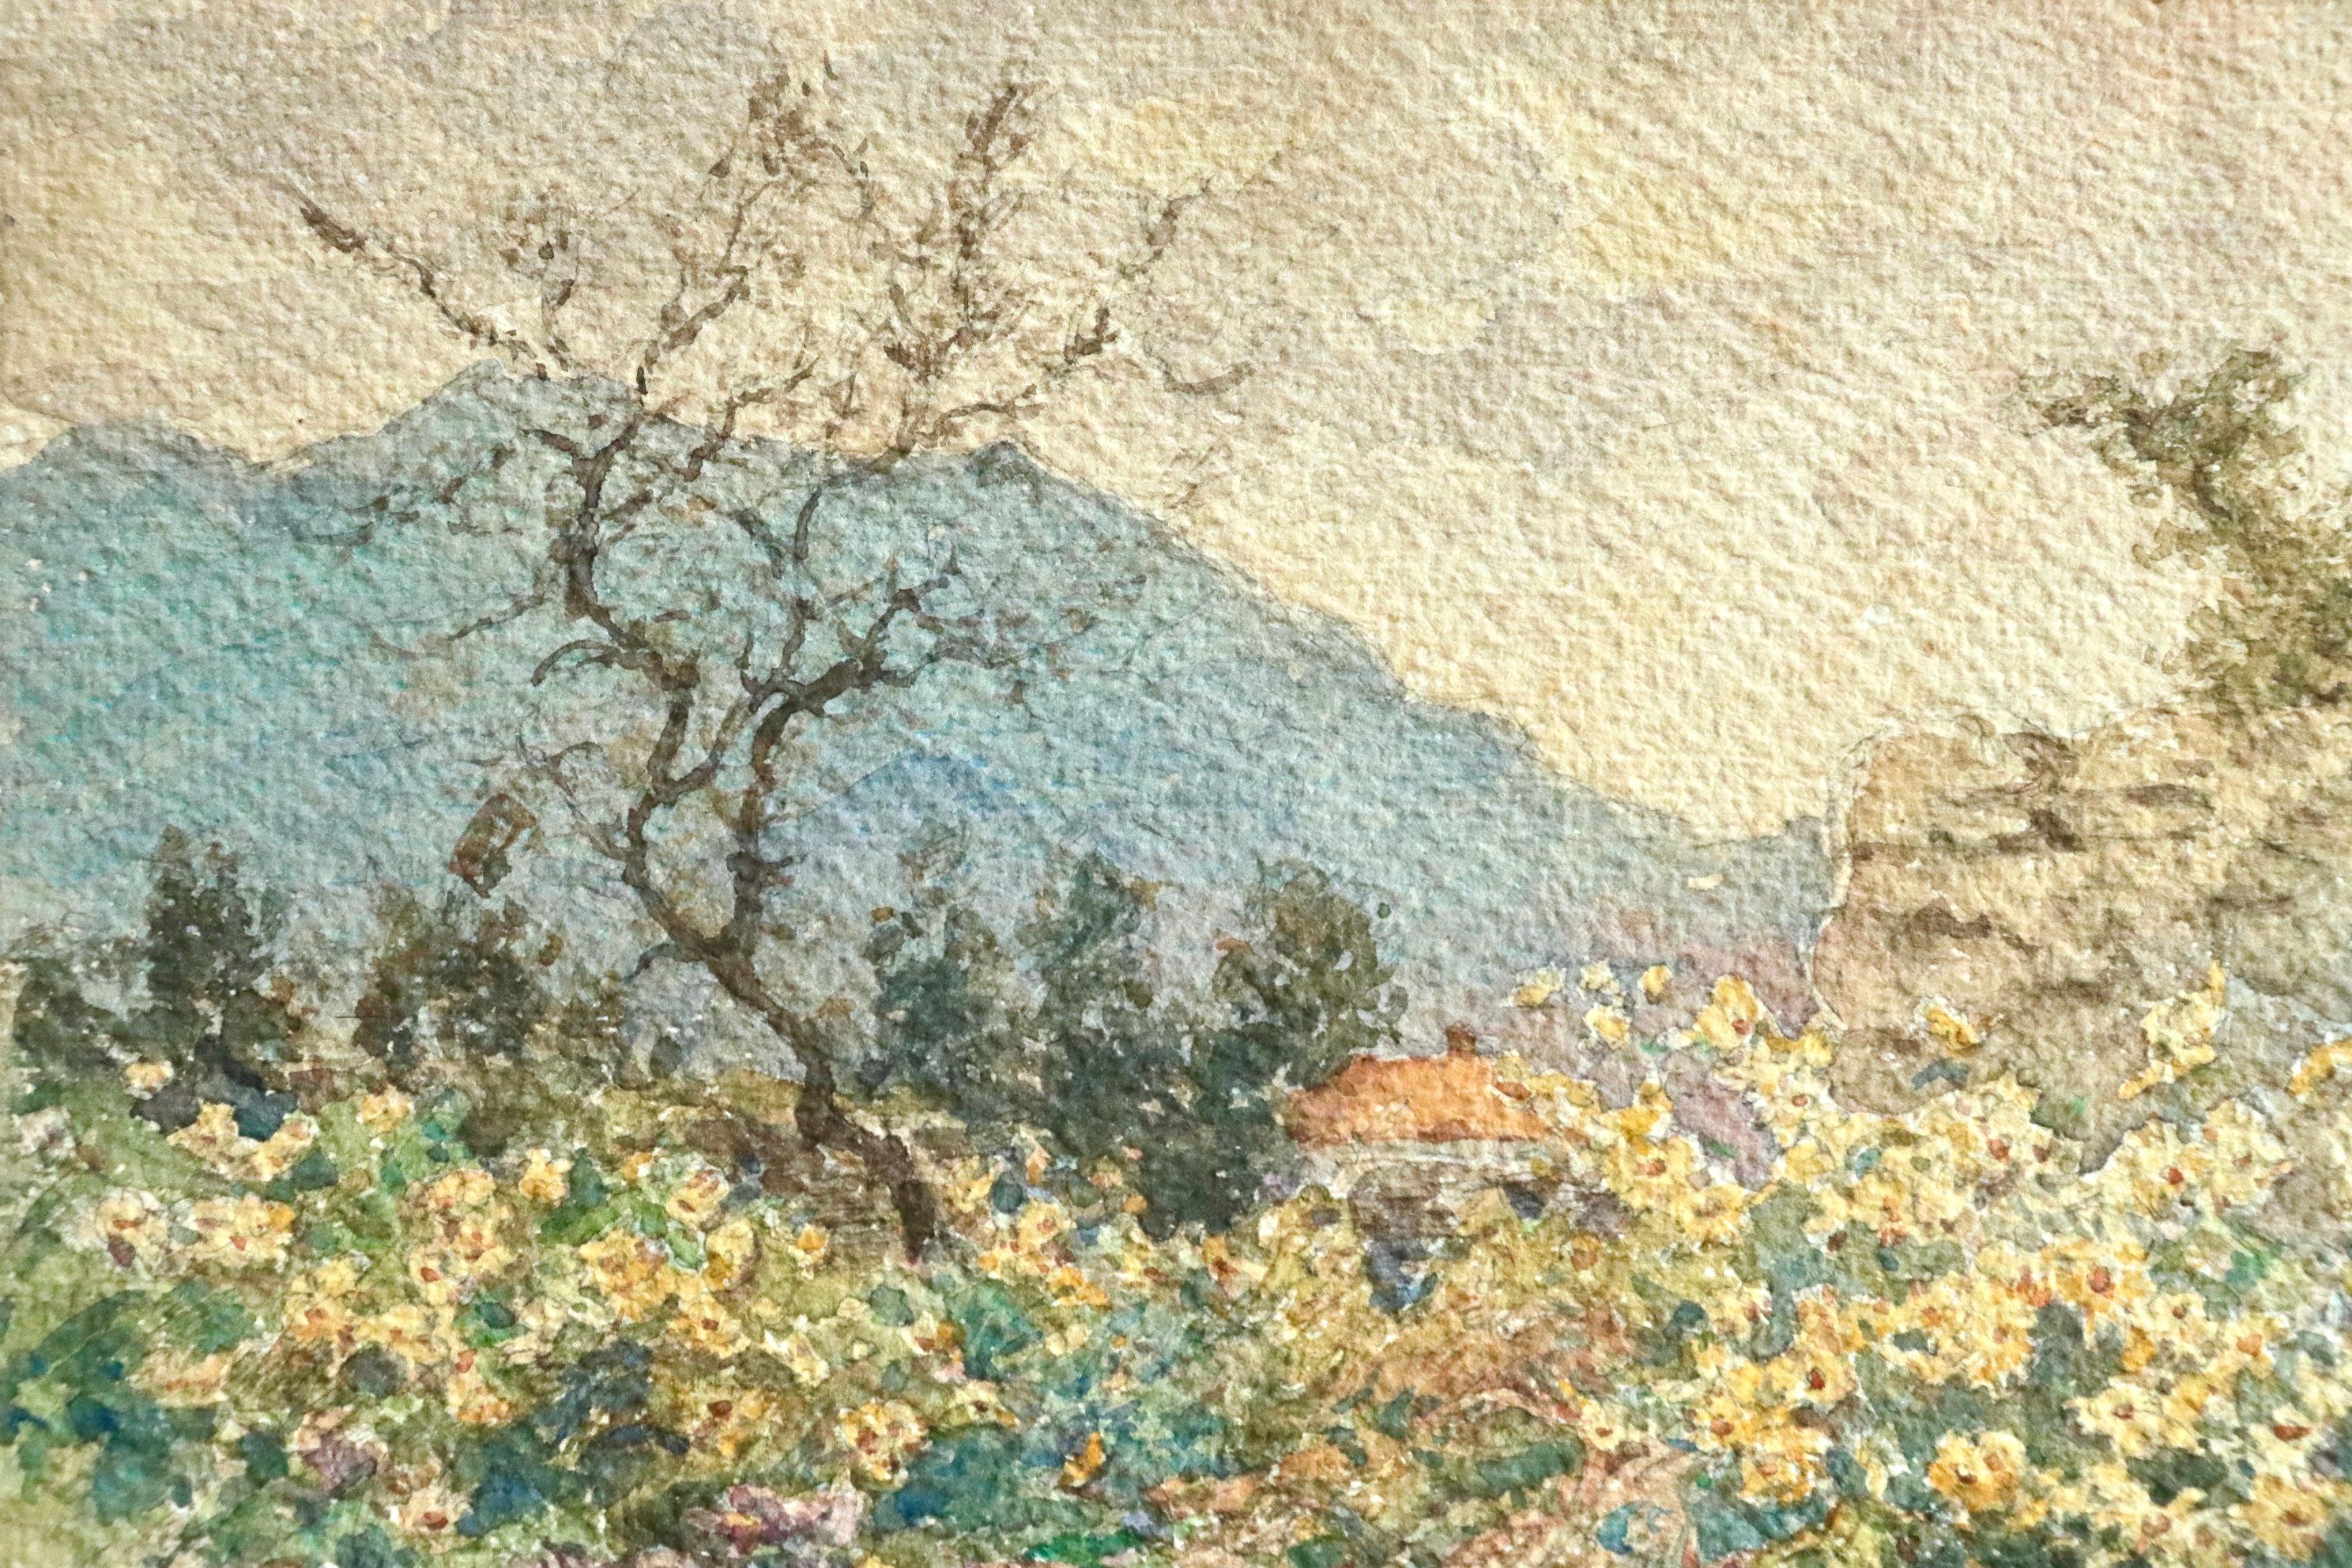 Watercolour on paper circa 1910 by Henri Duhme depicting an autumn landscape - with a path weaving through broken fences, yellow flowers and a bare tree, with a cottage in the distance and a view of the mountains beyond. Signed lower right. This